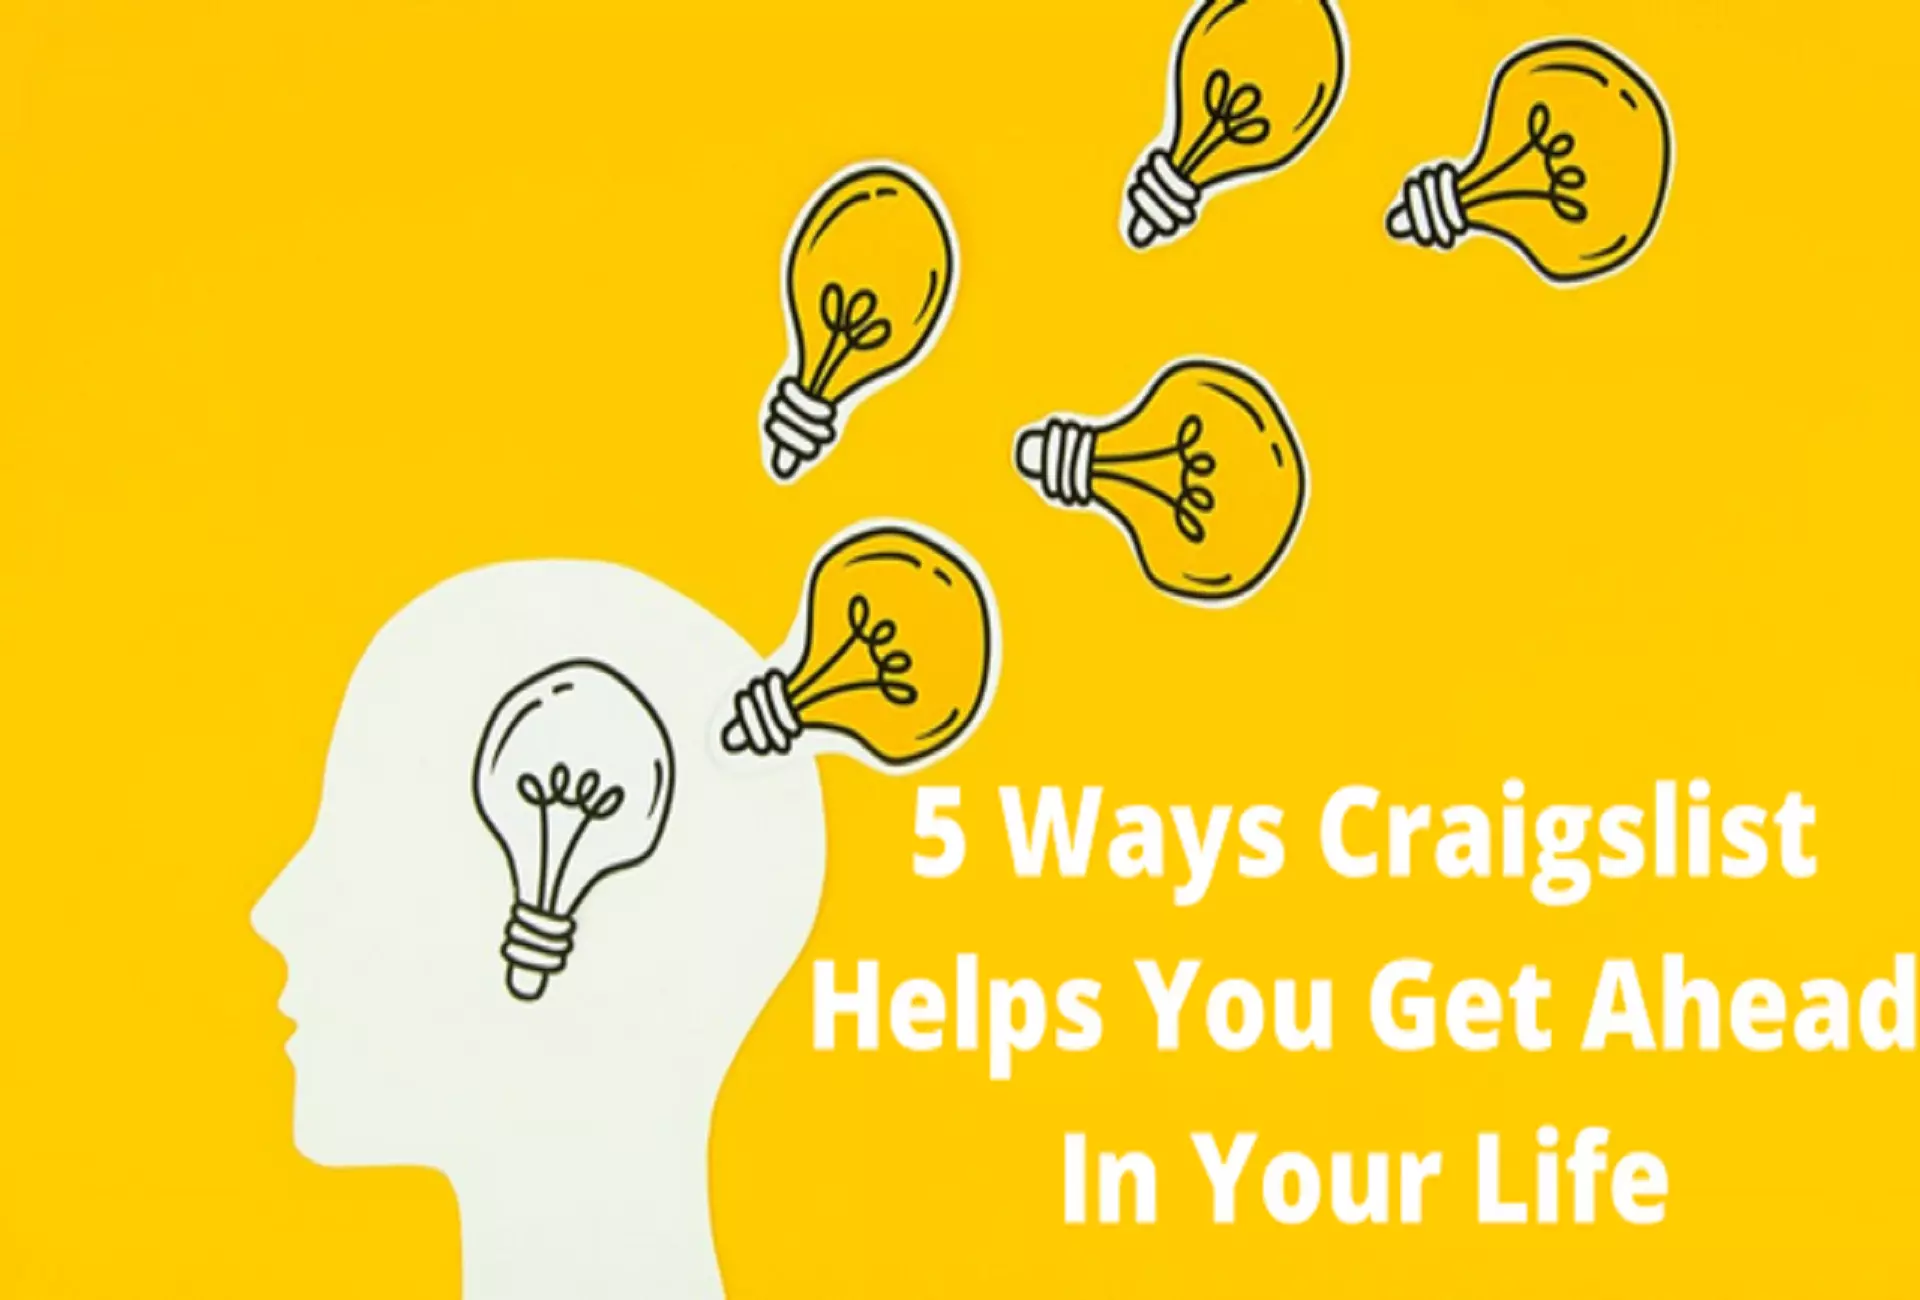 5 Ways Craigslist vt Helps You Get Ahead In Your Life